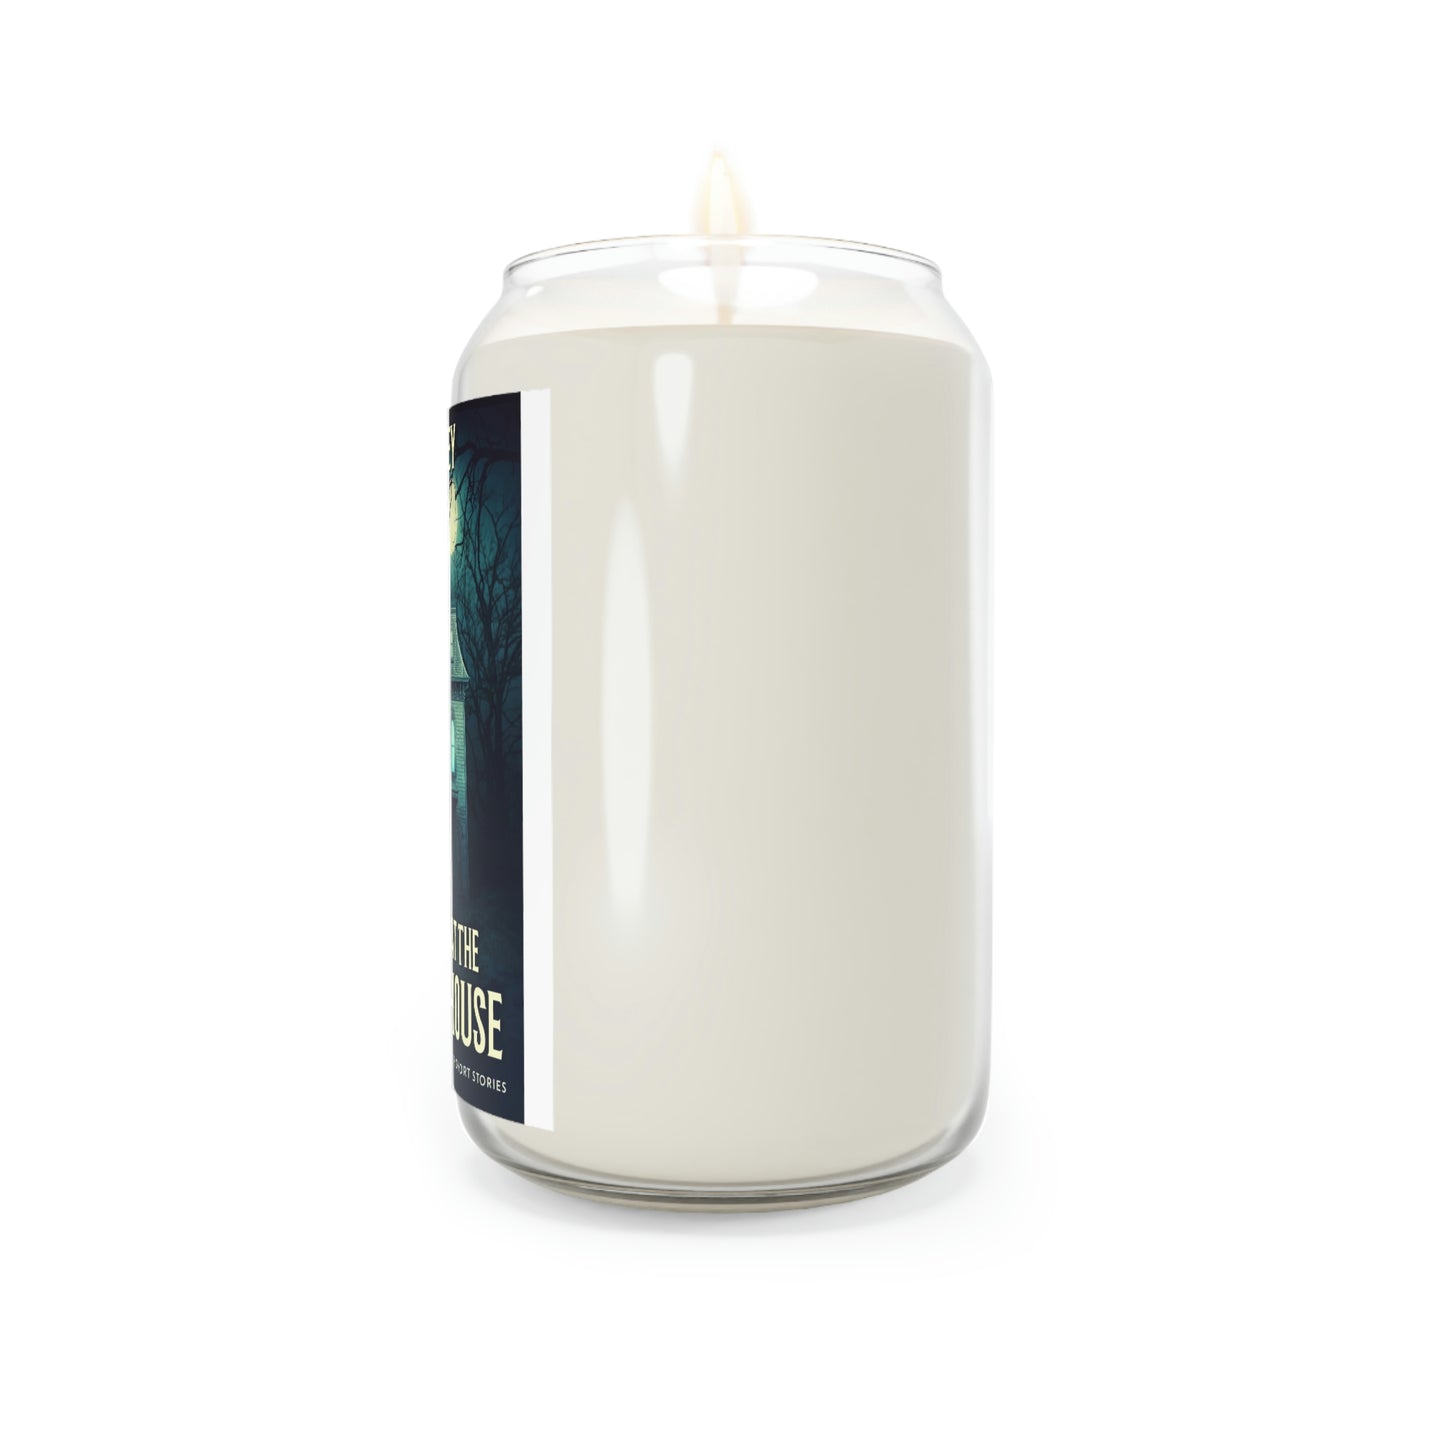 Murder at the Haunted House - Scented Candle